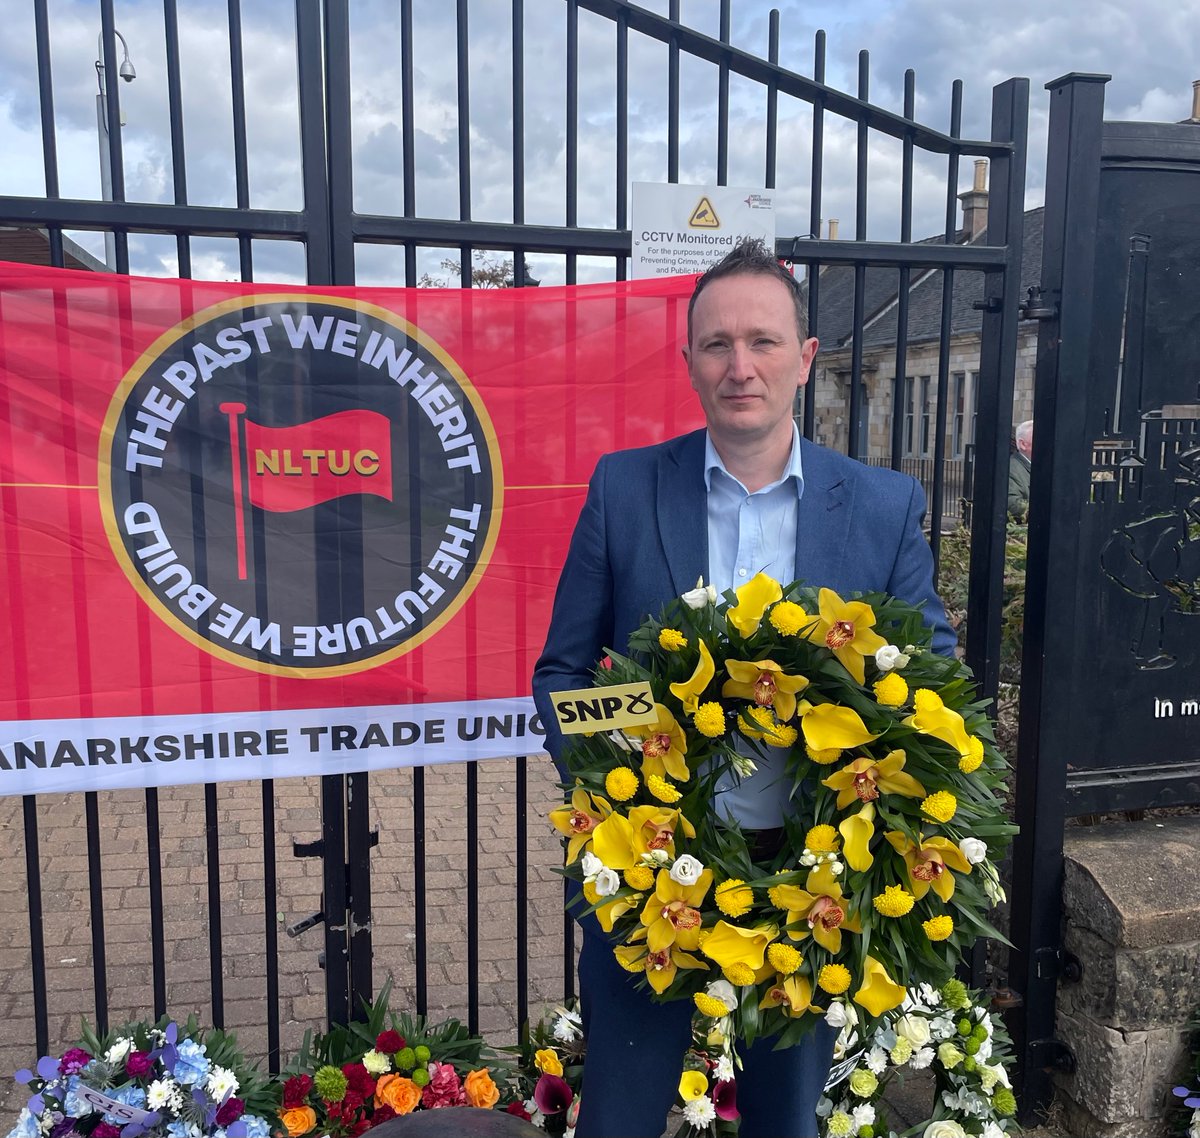 Privileged to attend and lay a wreath at the International Worker’s Memorial event at @SummerleeMuseum this afternoon. My thanks to the North Lanarkshire Trade Union Council for organising the event. ‘The Past we Inherit, the Future we Build’ #IWMD24